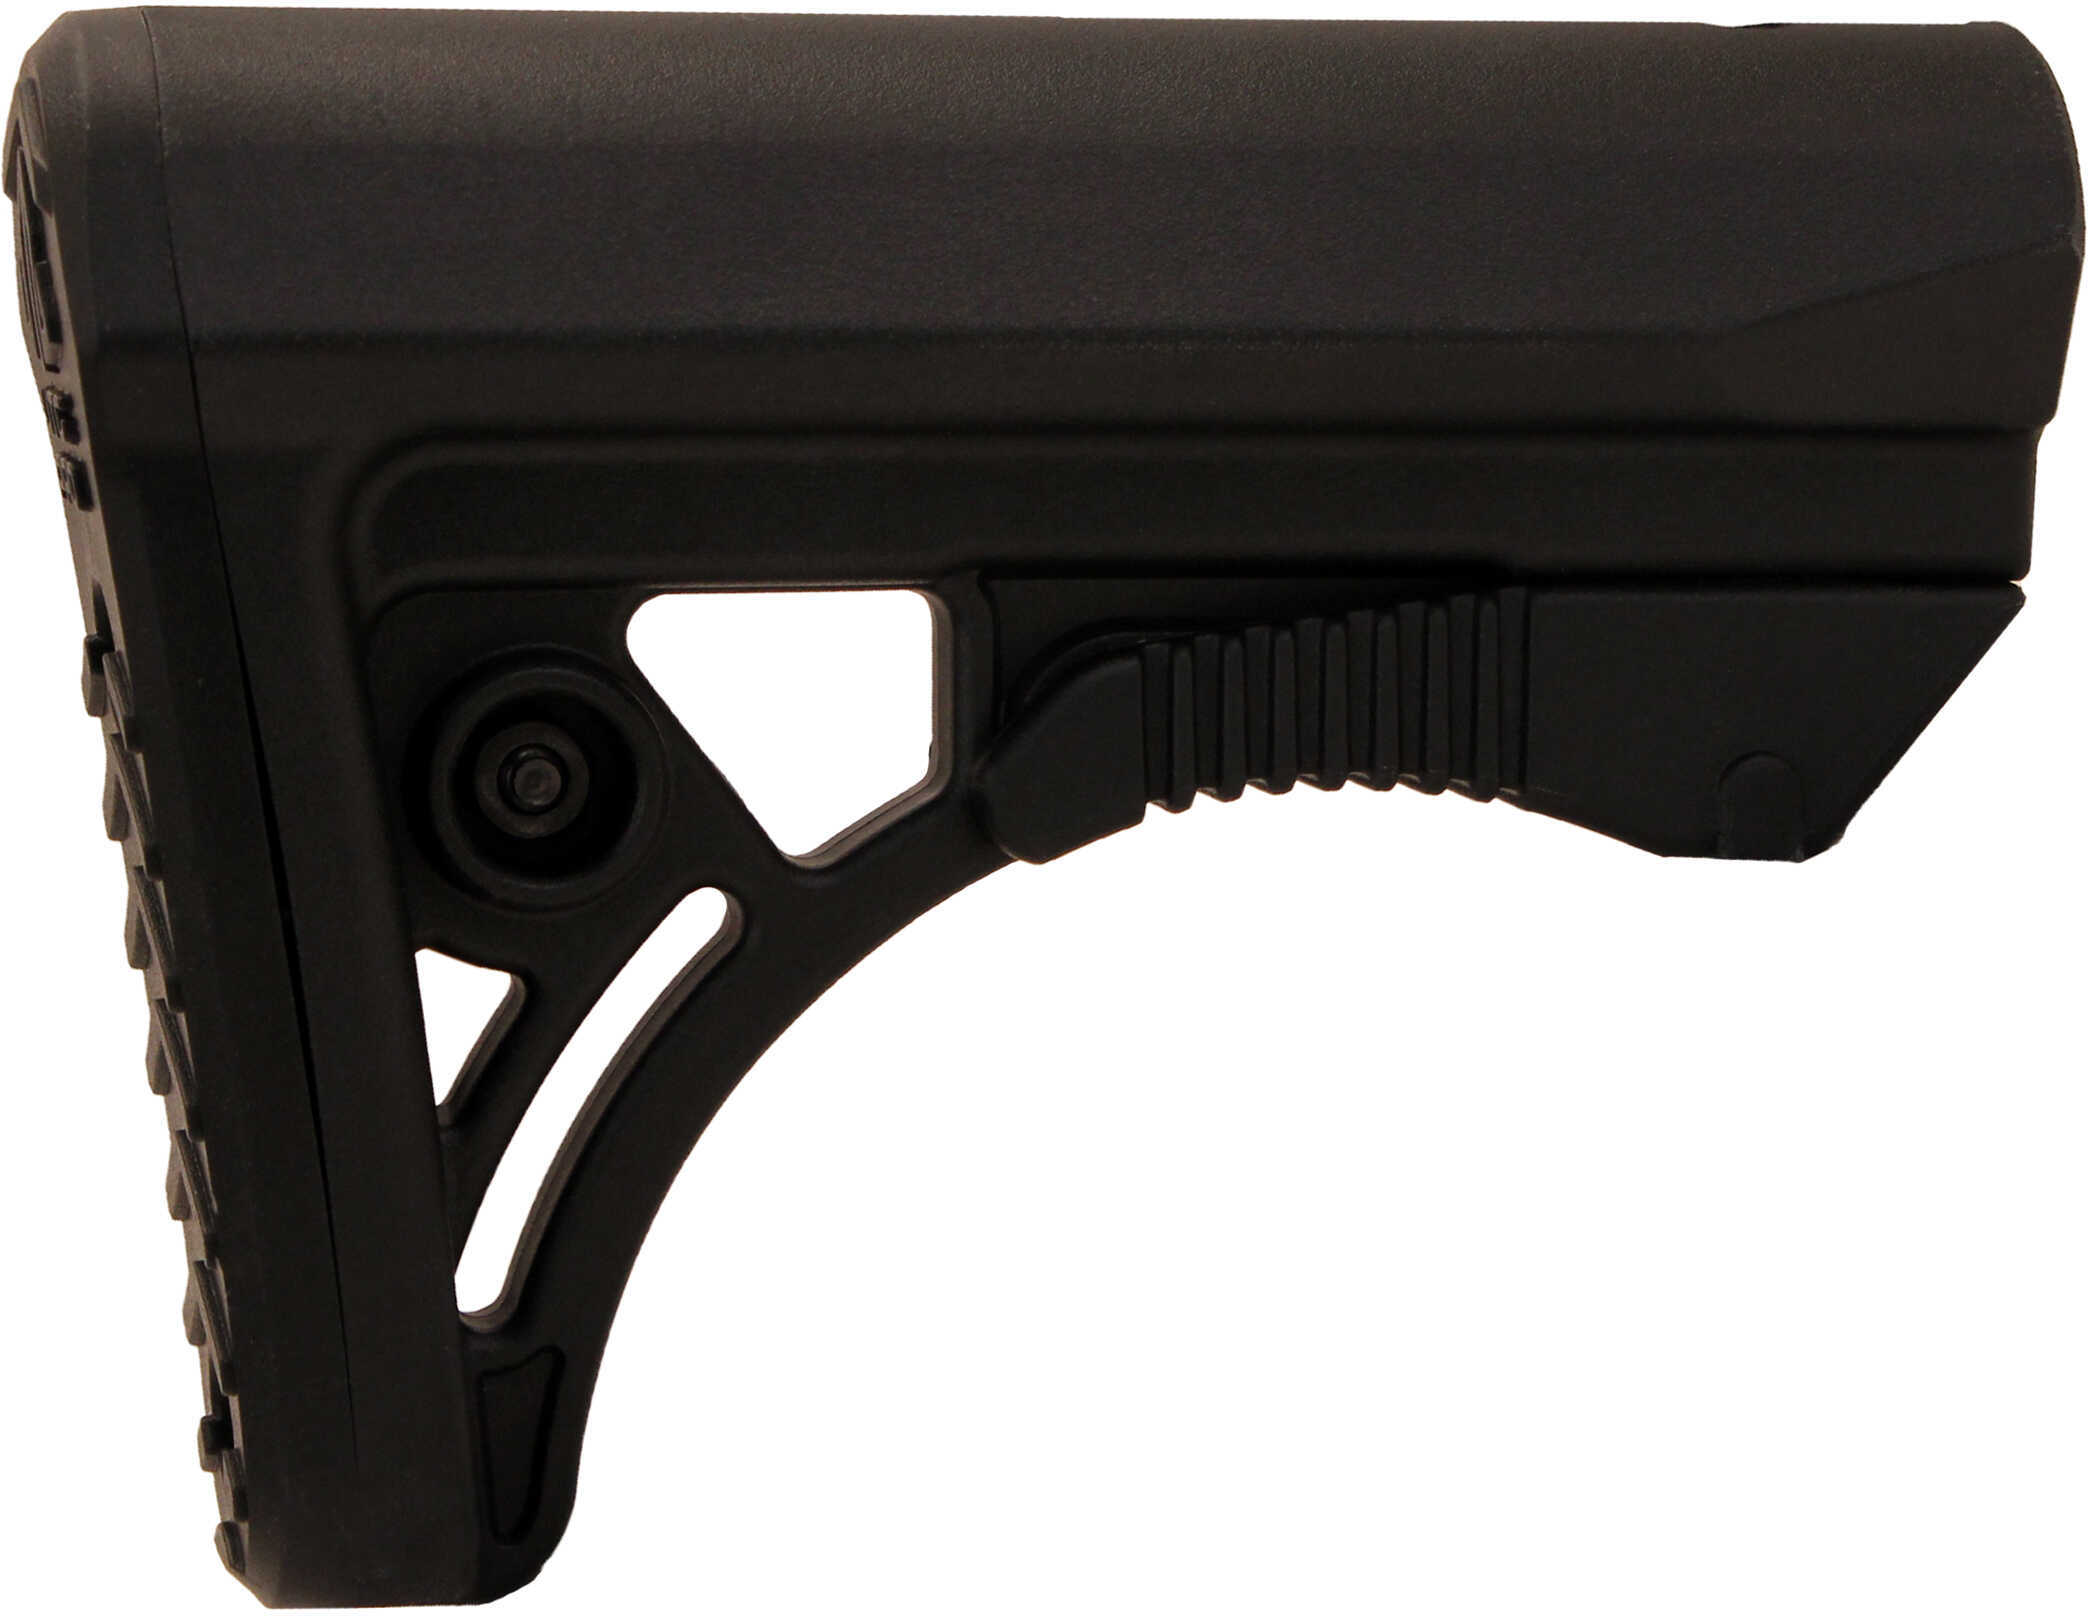 Leapers Inc. - UTG Model 4 Combat Ops S3 Stock Ambidextrous Sling Loop and Reversible QD Swivel Housing Polymer